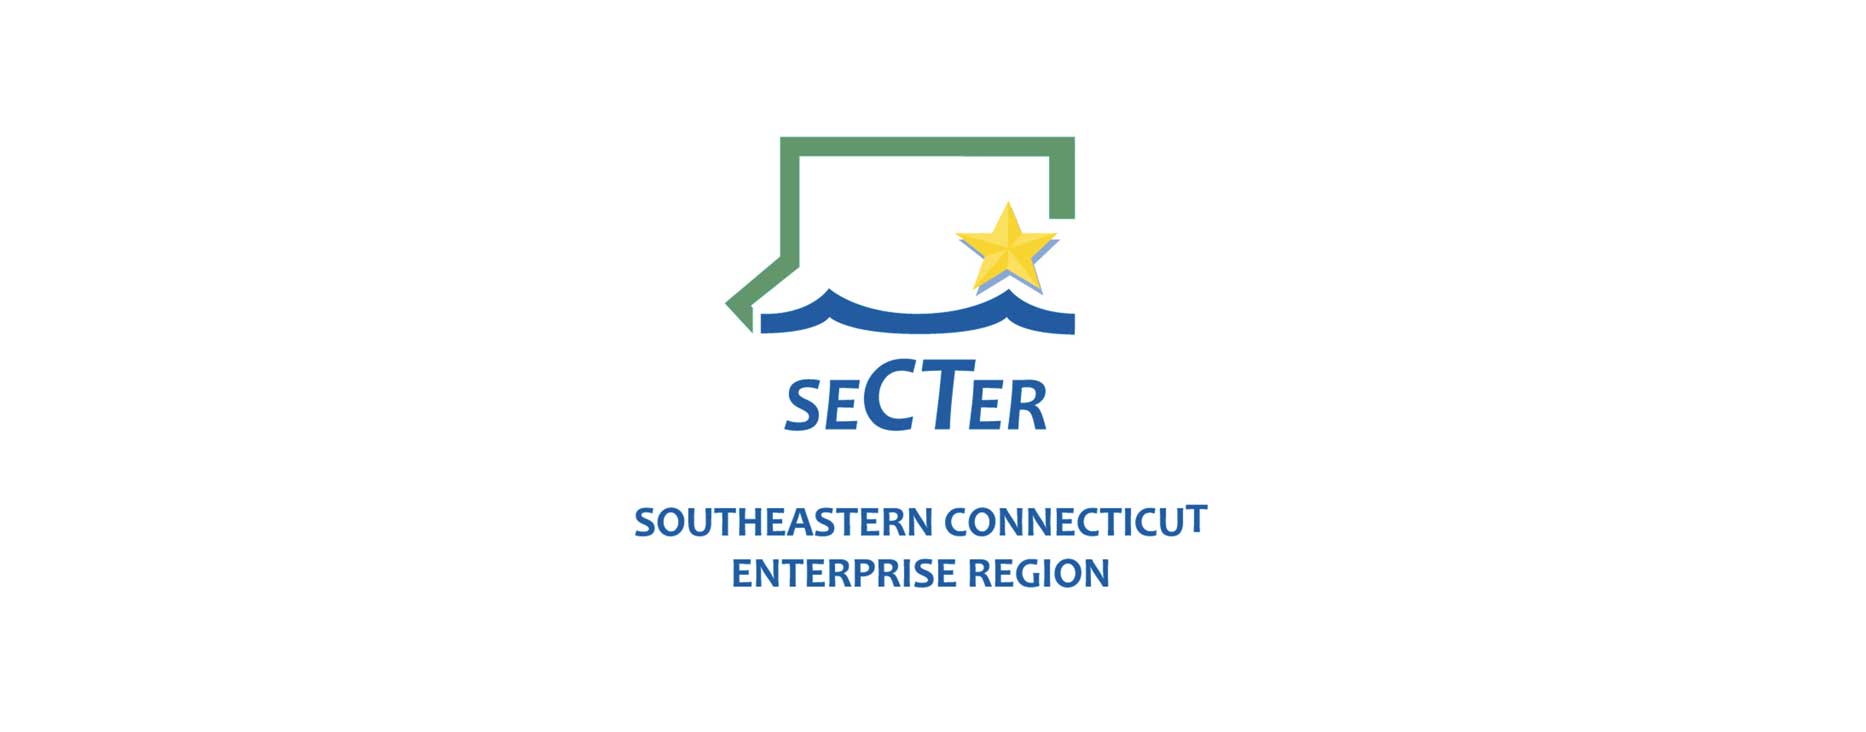 Connecticut Small Business Support Program Announced featured image.